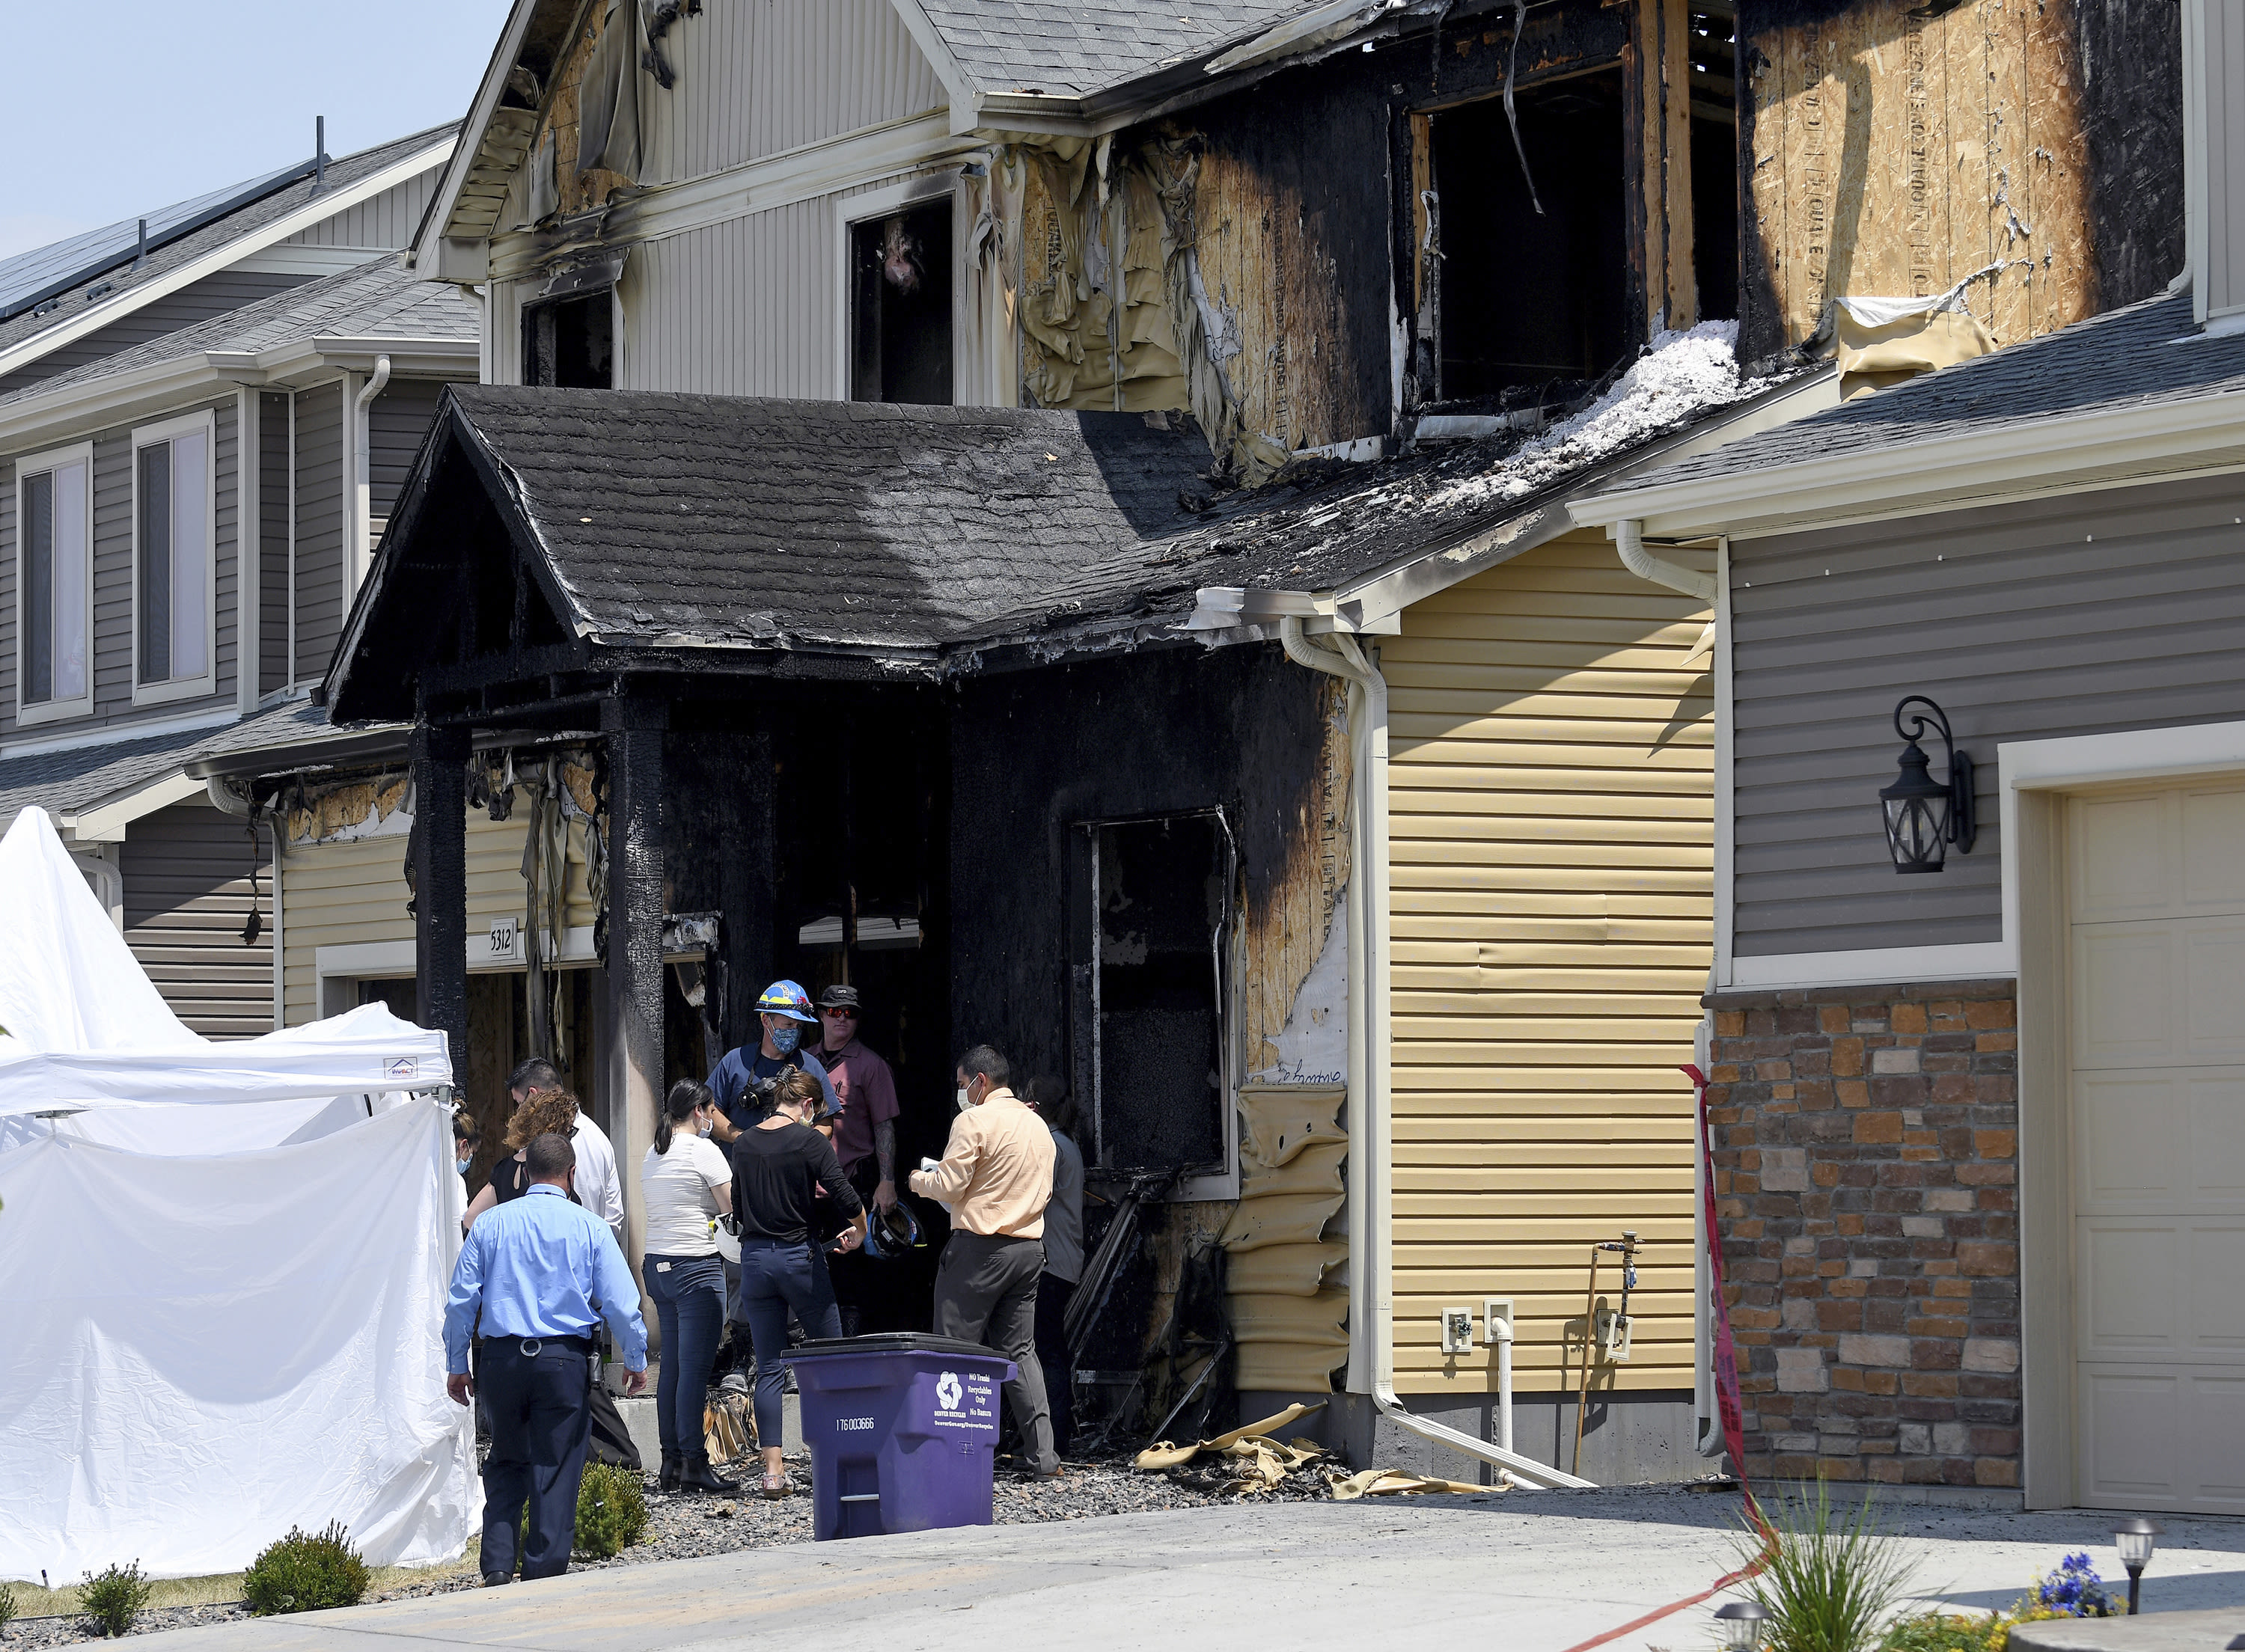 Man accused of setting Denver house fire that killed 5 in Senegalese family set to enter plea